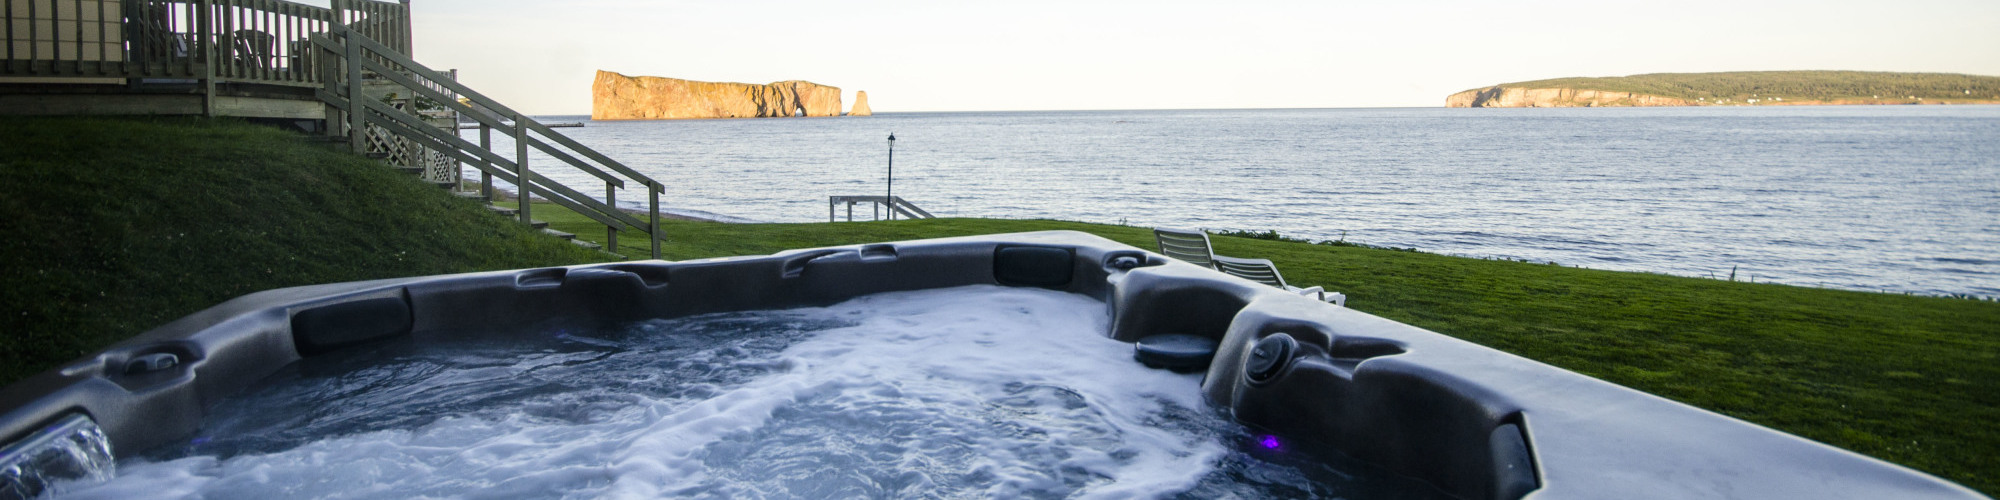 Hot tub, view of the sea and Percé Rock